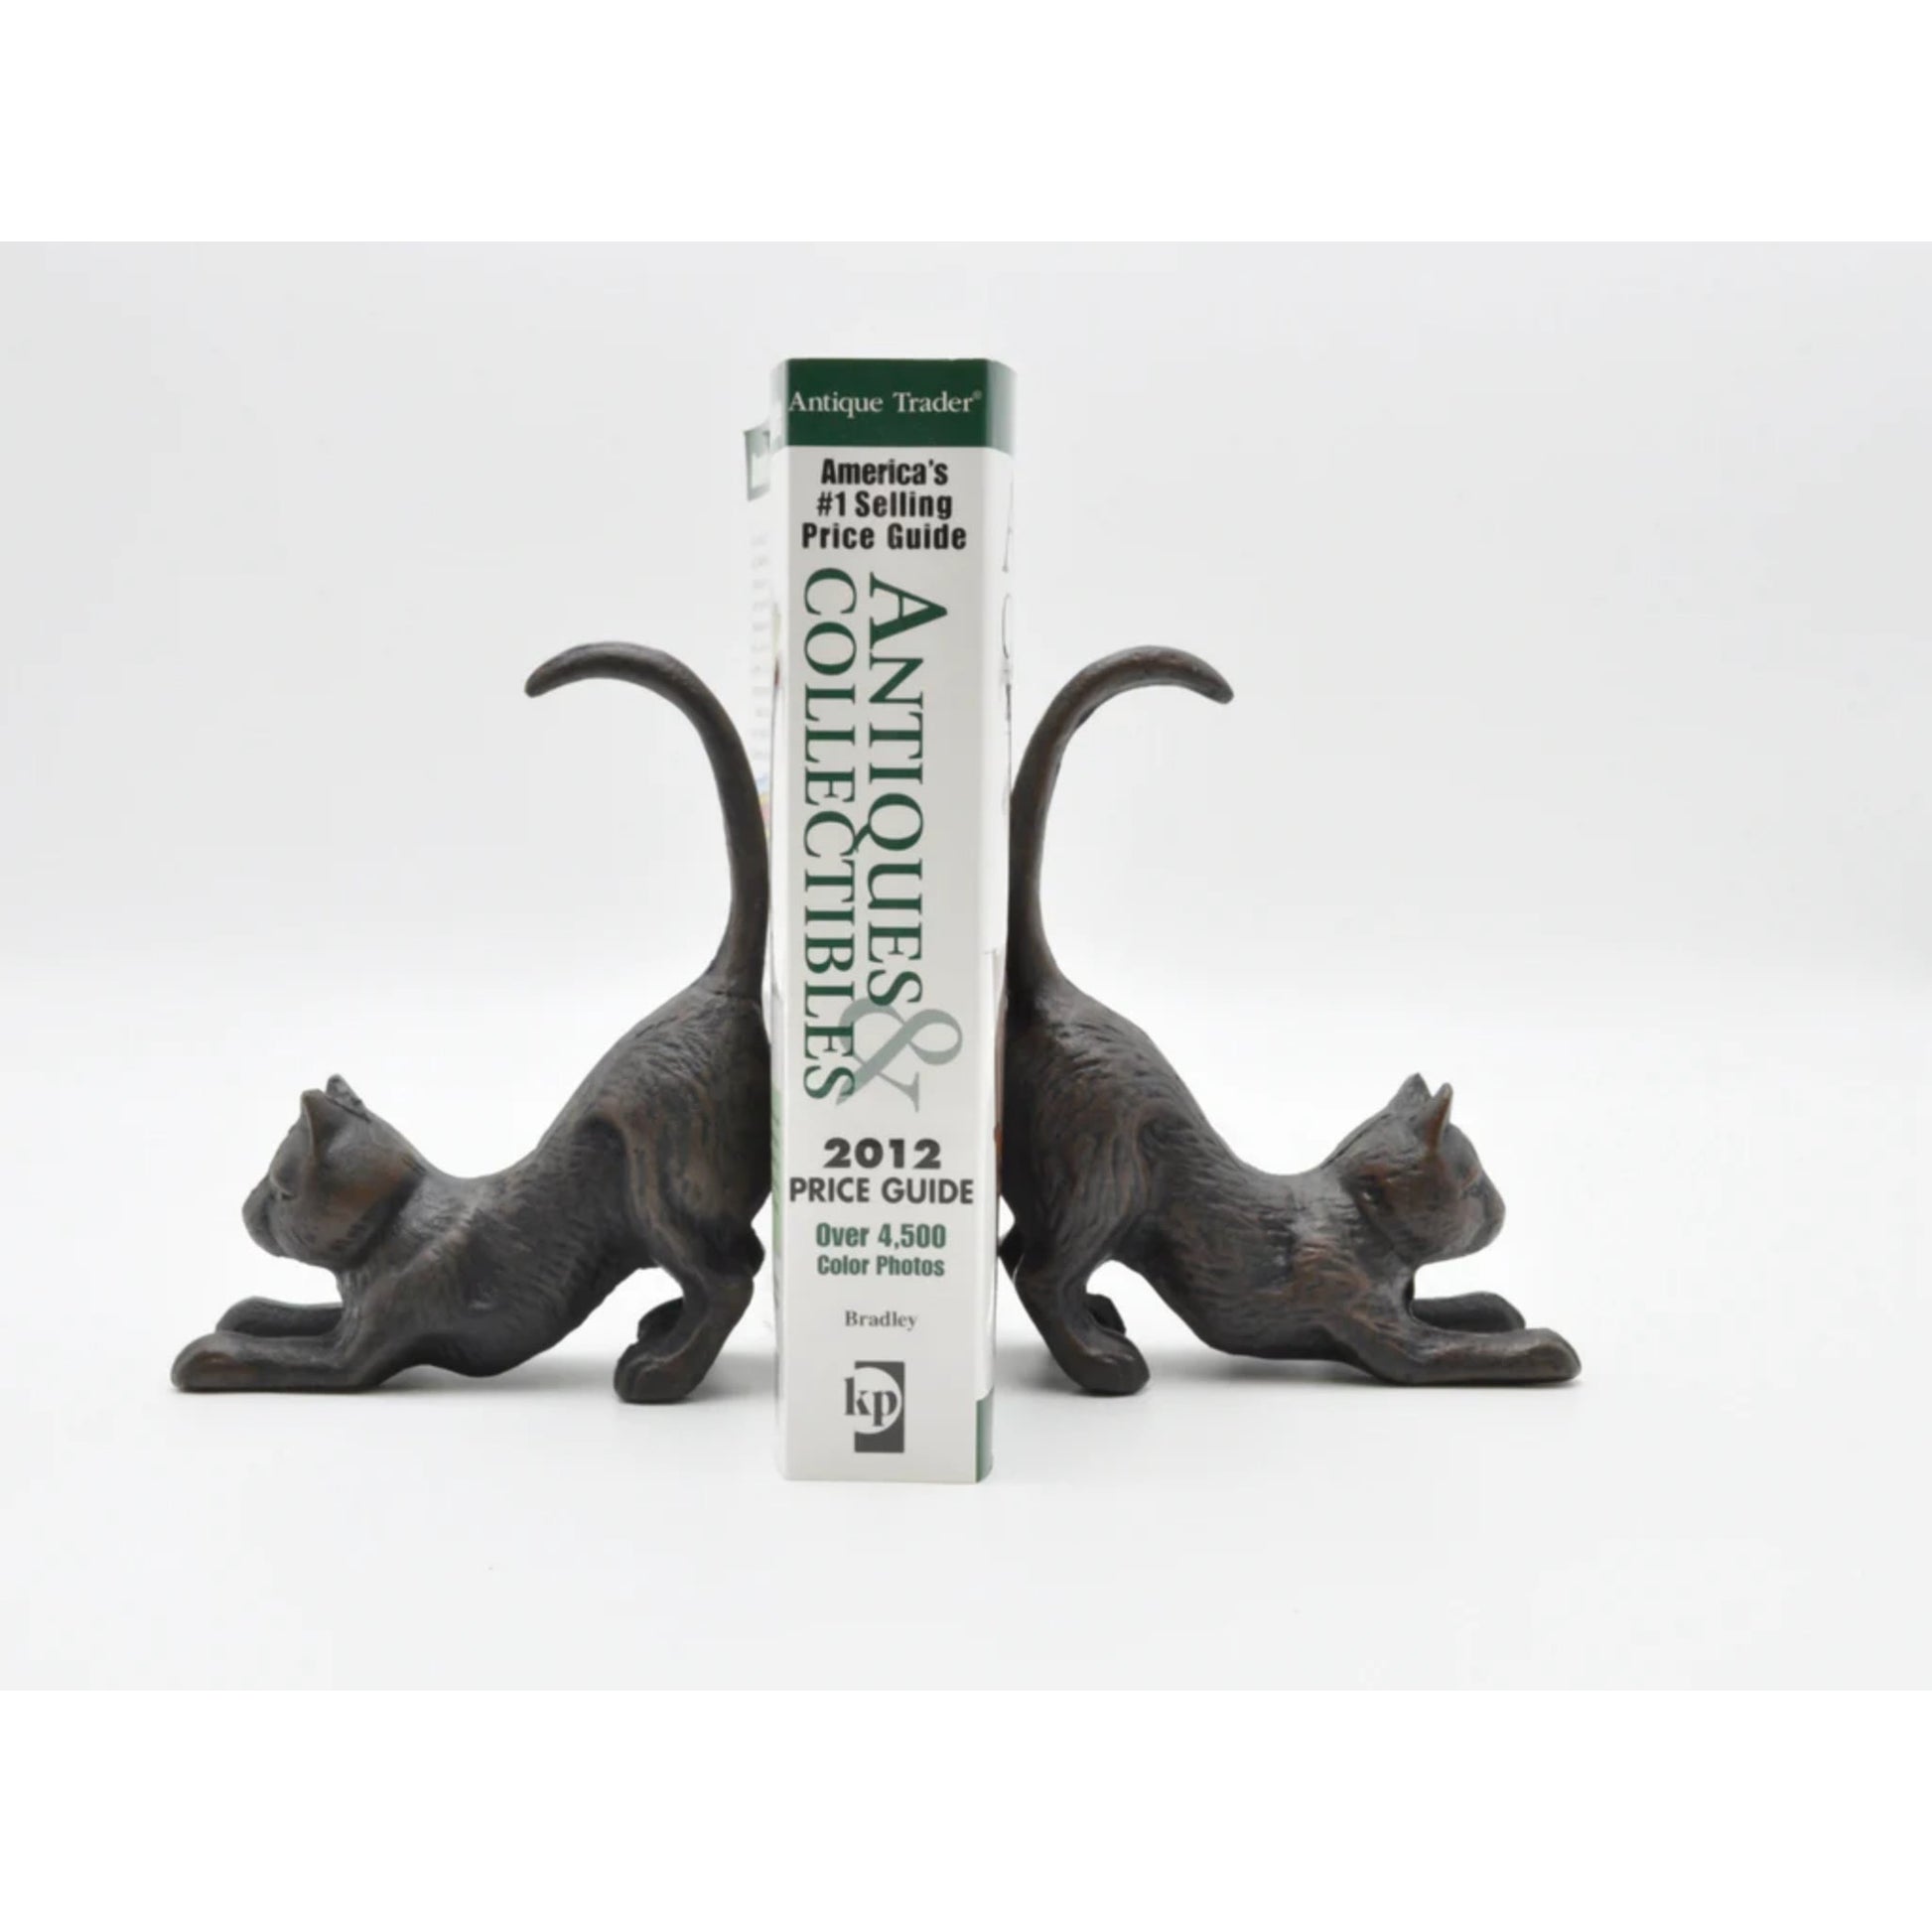 "Vintage Cats": Bookends - "The Sisters" (Set of 2) - Tiny Tiger Gift Shop